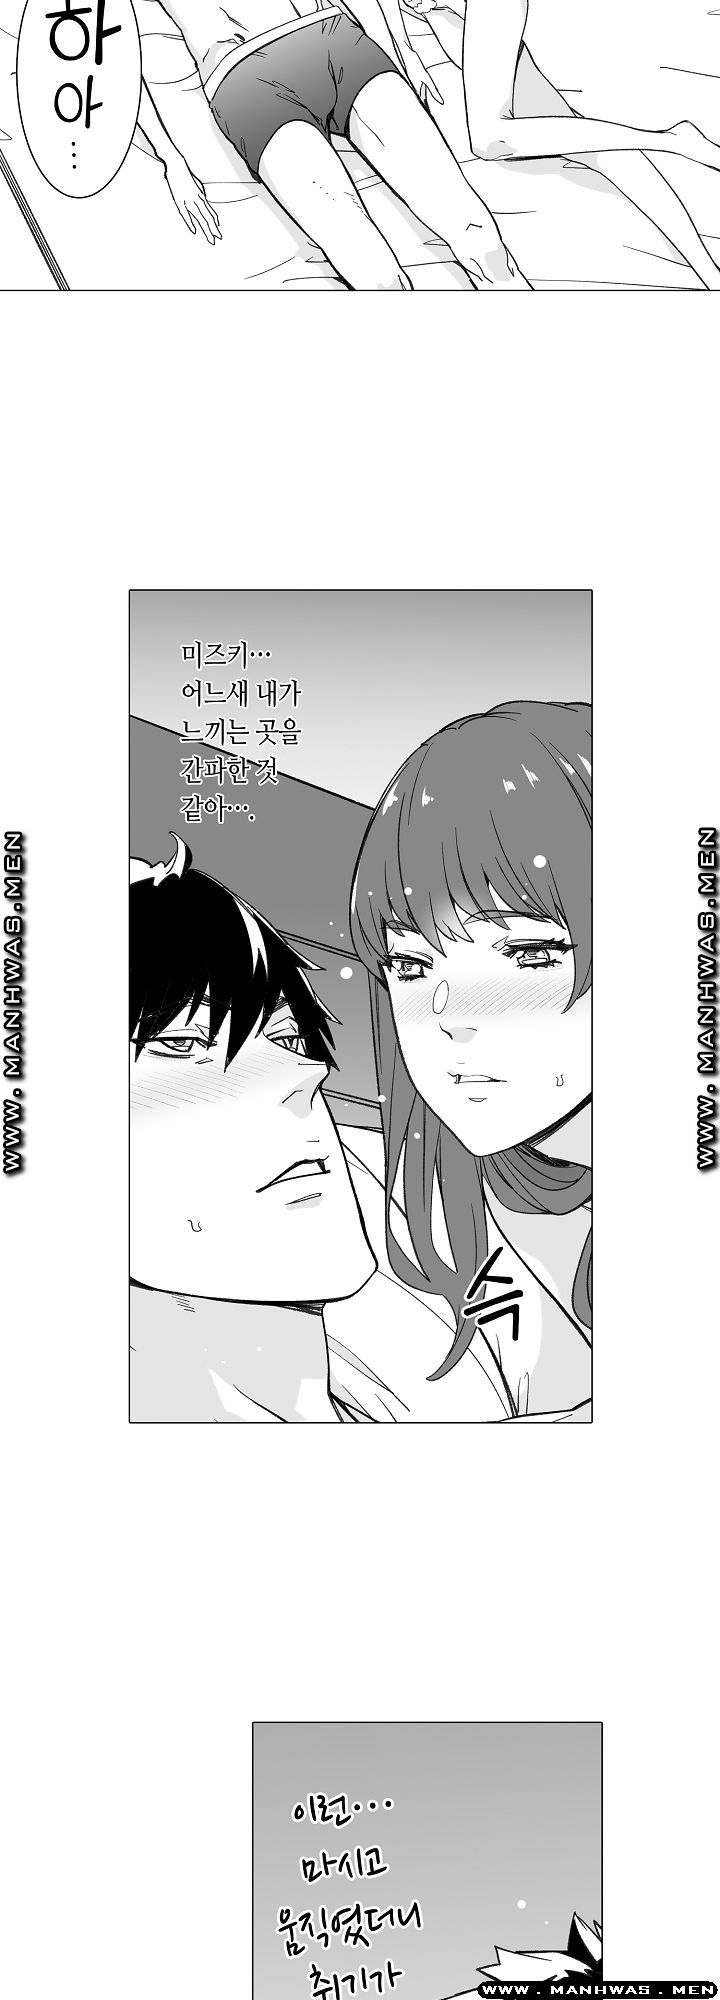 Please Let Me Go Home Raw - Chapter 22 Page 20